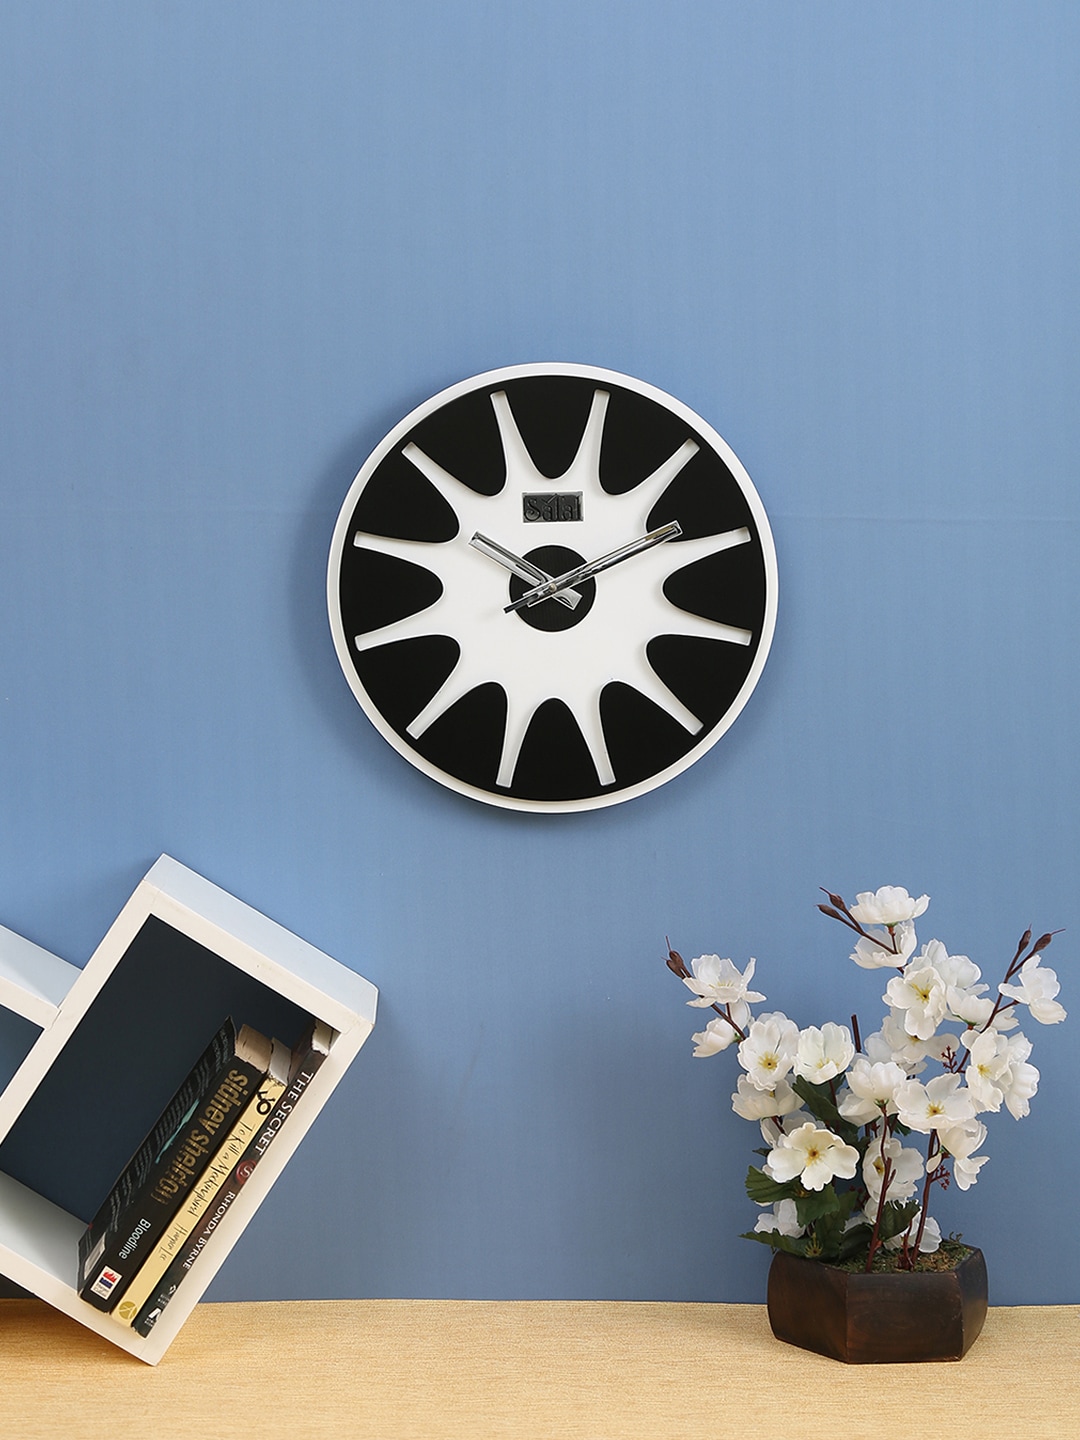 Safal White & Black Solid Dial Round Analogue Wall Clock Price in India